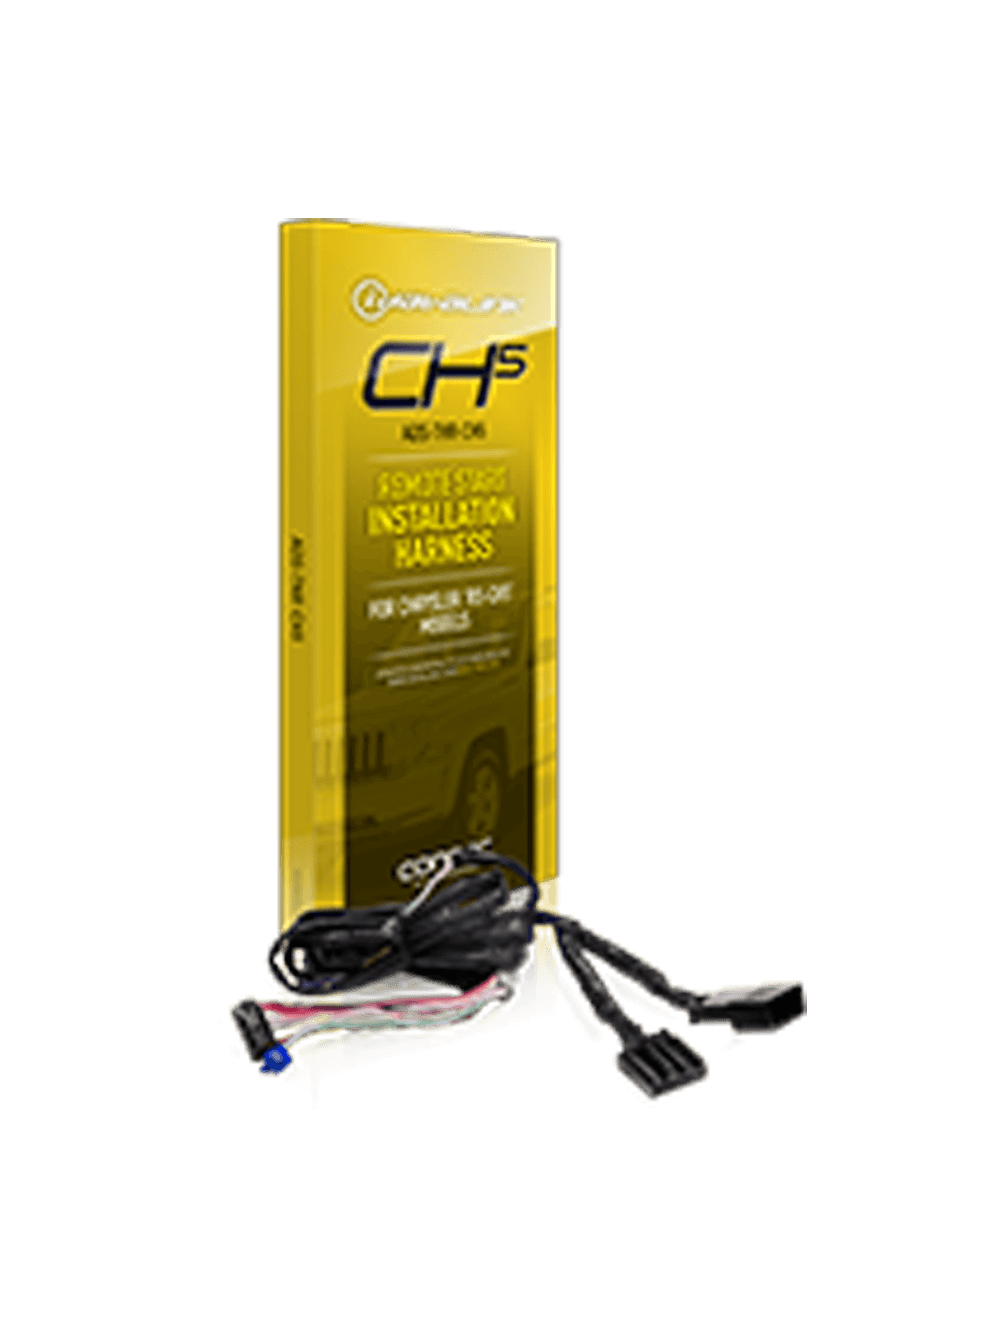 iDataLink ADS-THR-CH5 T-Harness For Select Chrysler Standard Key Models From 2005-Up (ADSTHRCH5)